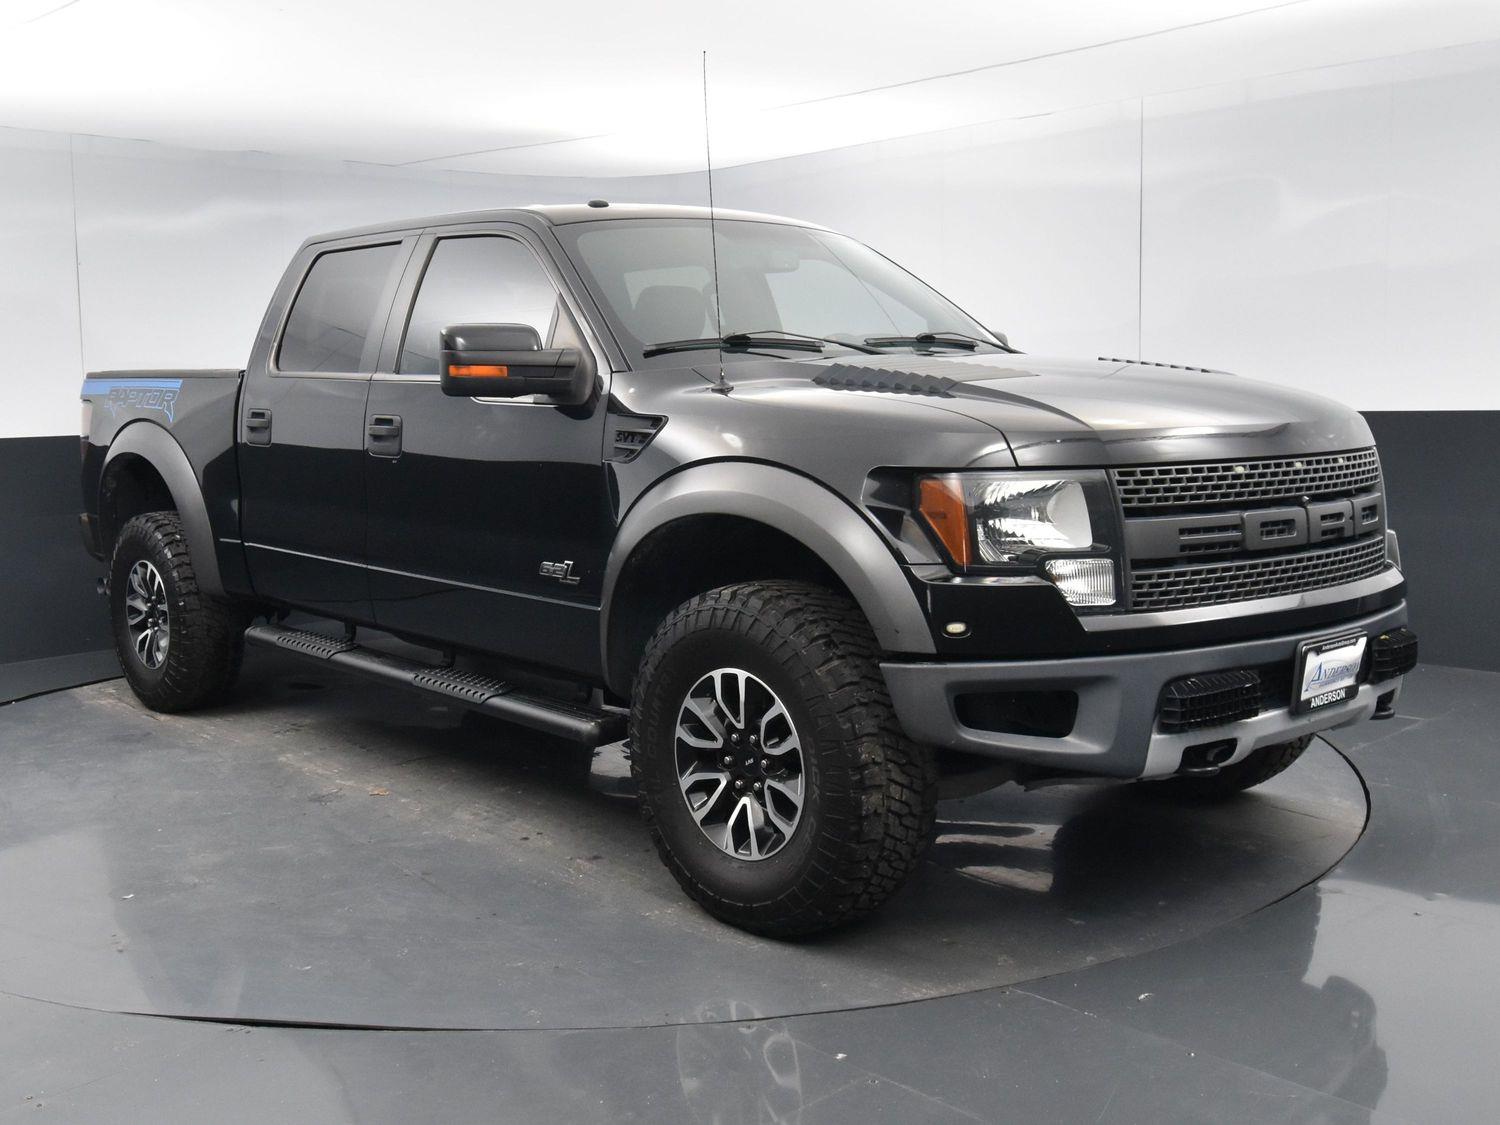 Used 2012 Ford F-150 SVT Raptor Crew Cab Truck for sale in Grand Island NE